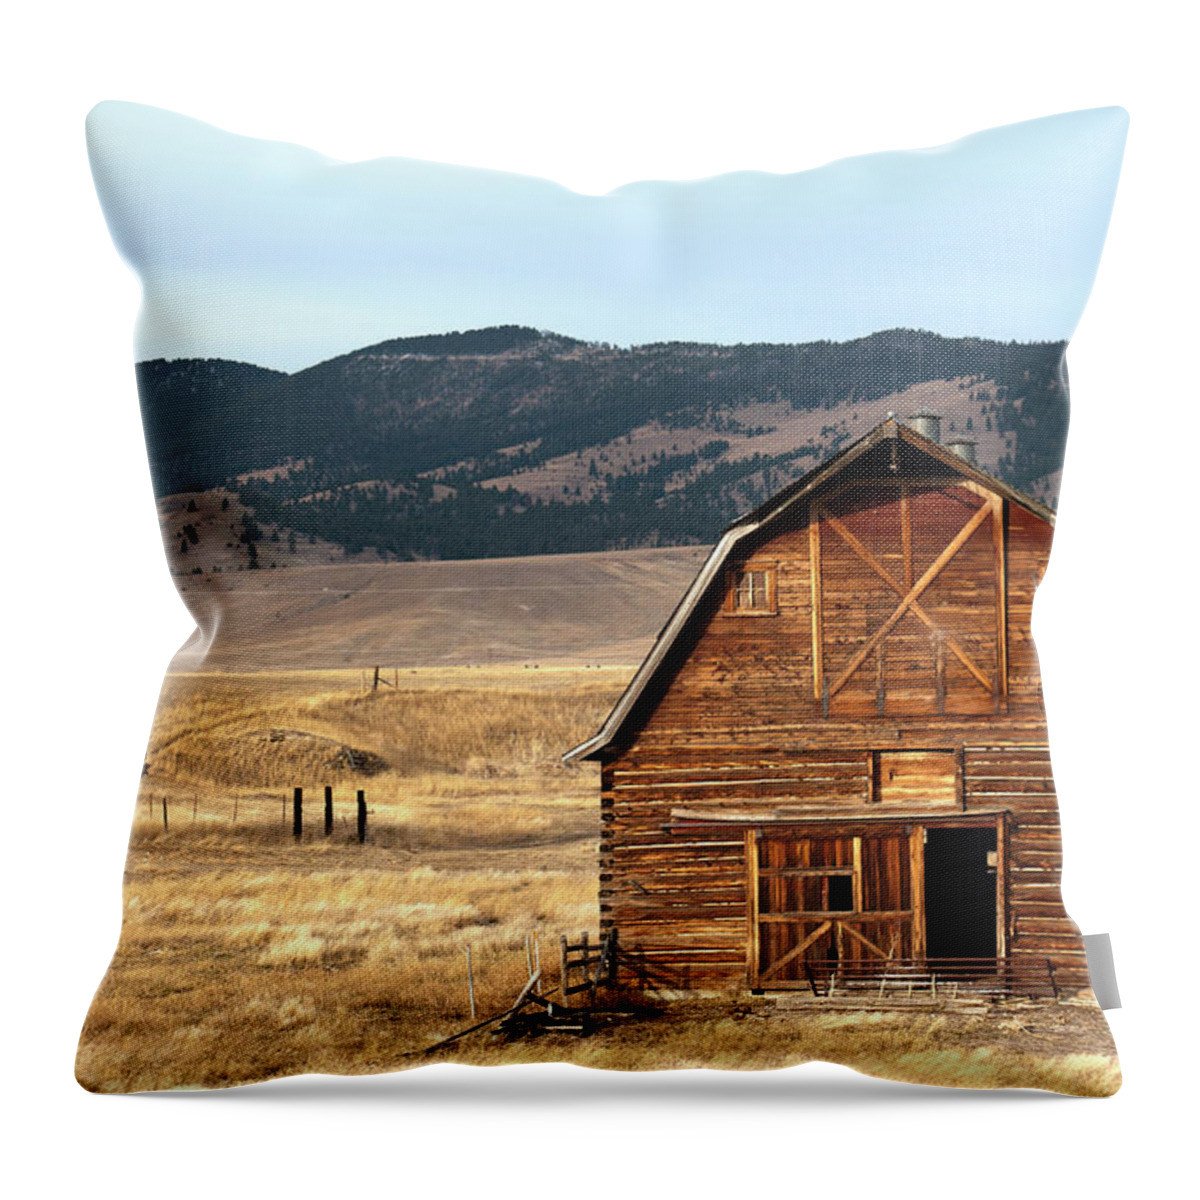 Scenics Throw Pillow featuring the photograph Wooden Hut In The Countryside Of by Feifei Cui-paoluzzo